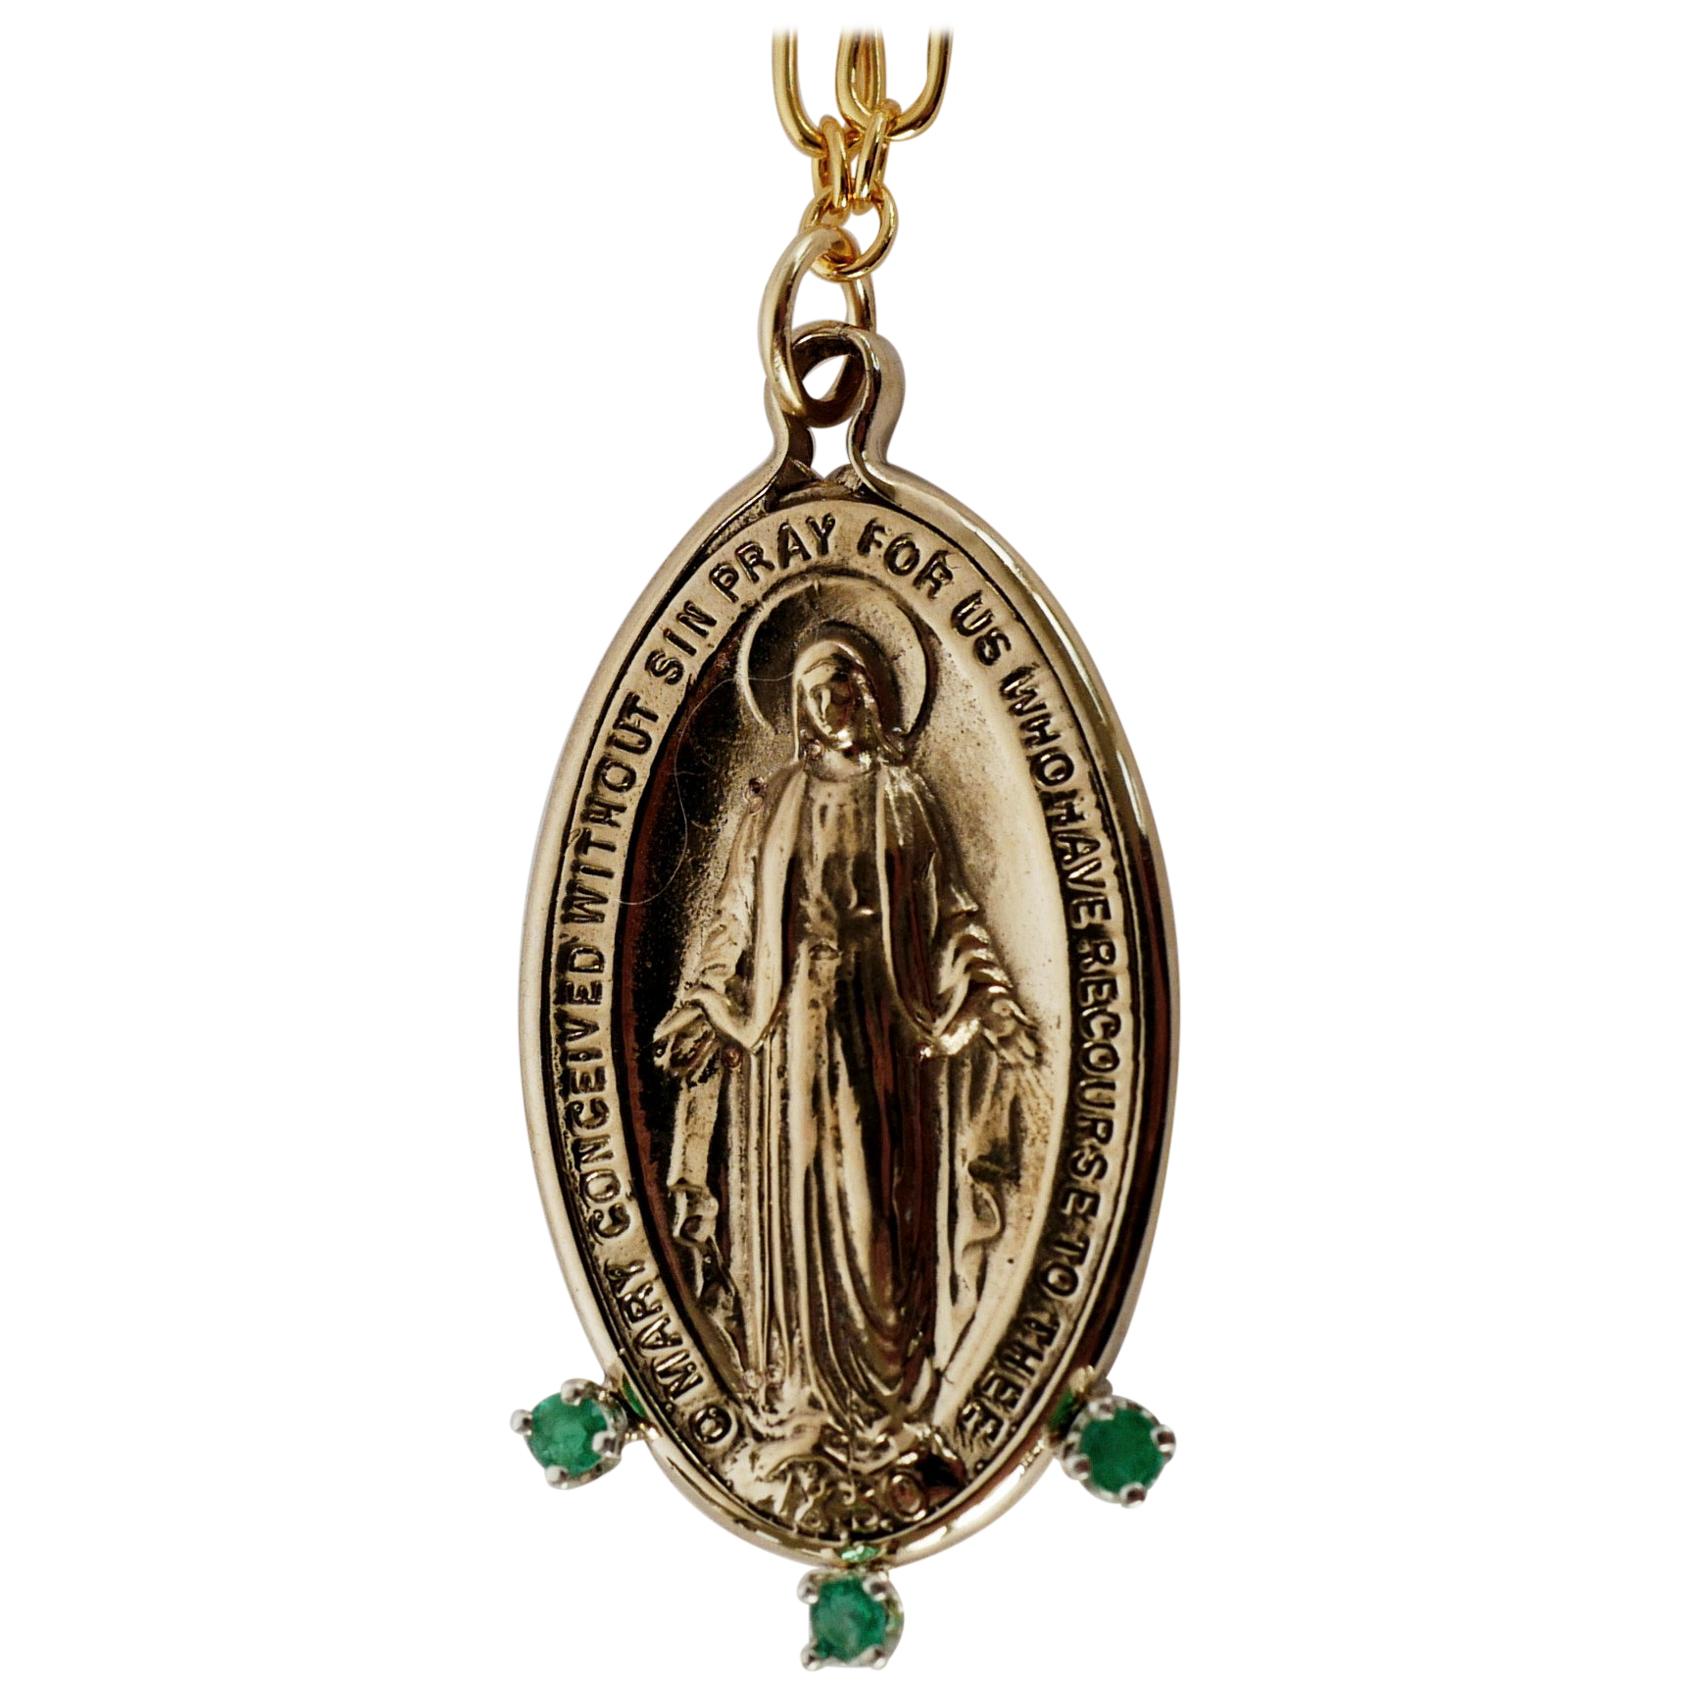 Emerald Virgin Mary Medal Chunky Chain Necklace Bronze Gold Filled J Dauphin For Sale